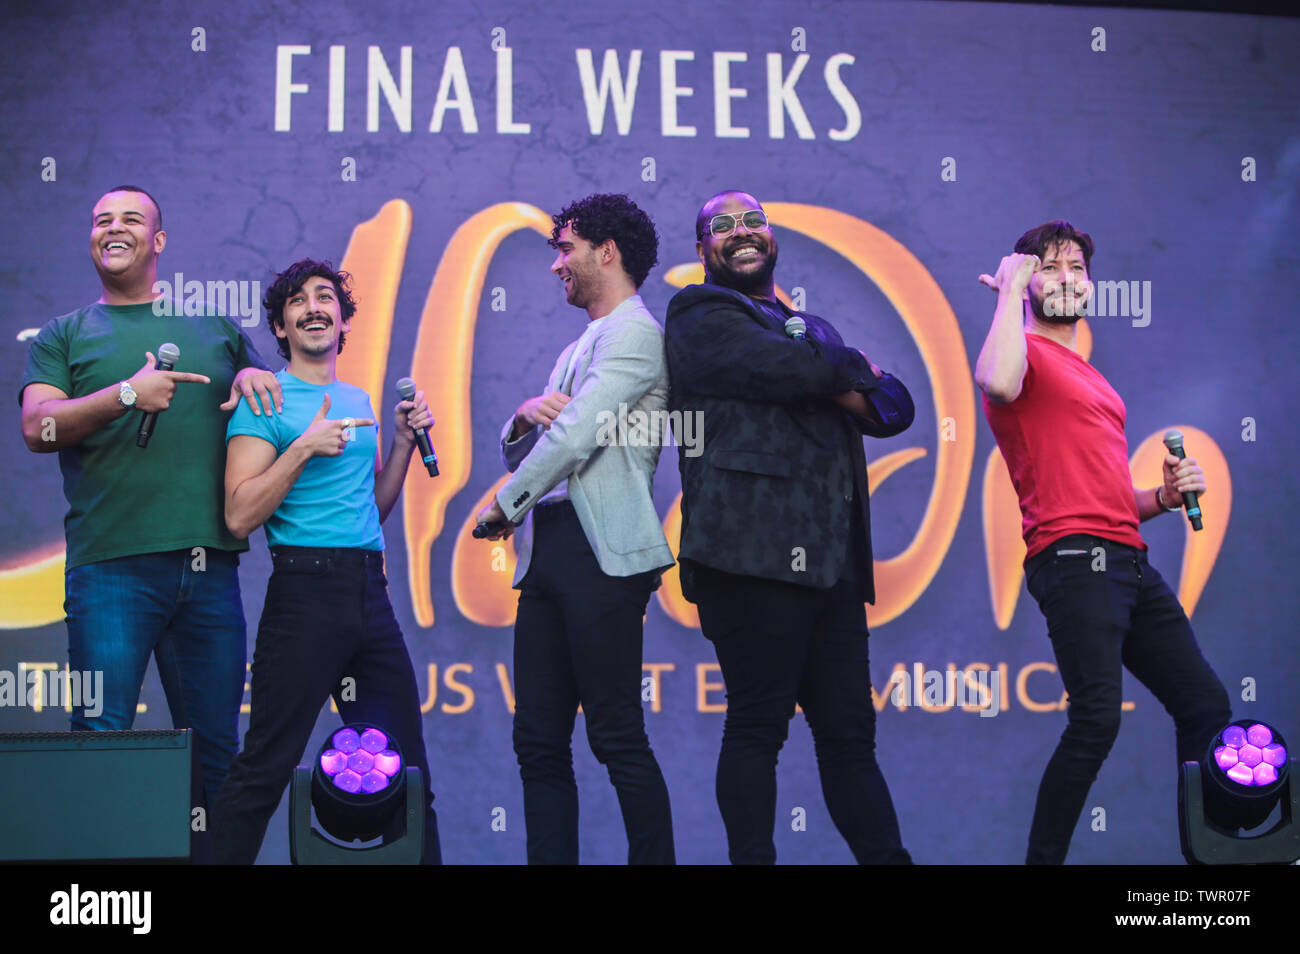 London, UK. 22 June 2019 West End Live the musicals in Trafalgar Square  ,the cast of Disney's AladdinThe Musical performing live infront of  thousands of people who come to enjoy the sunshine